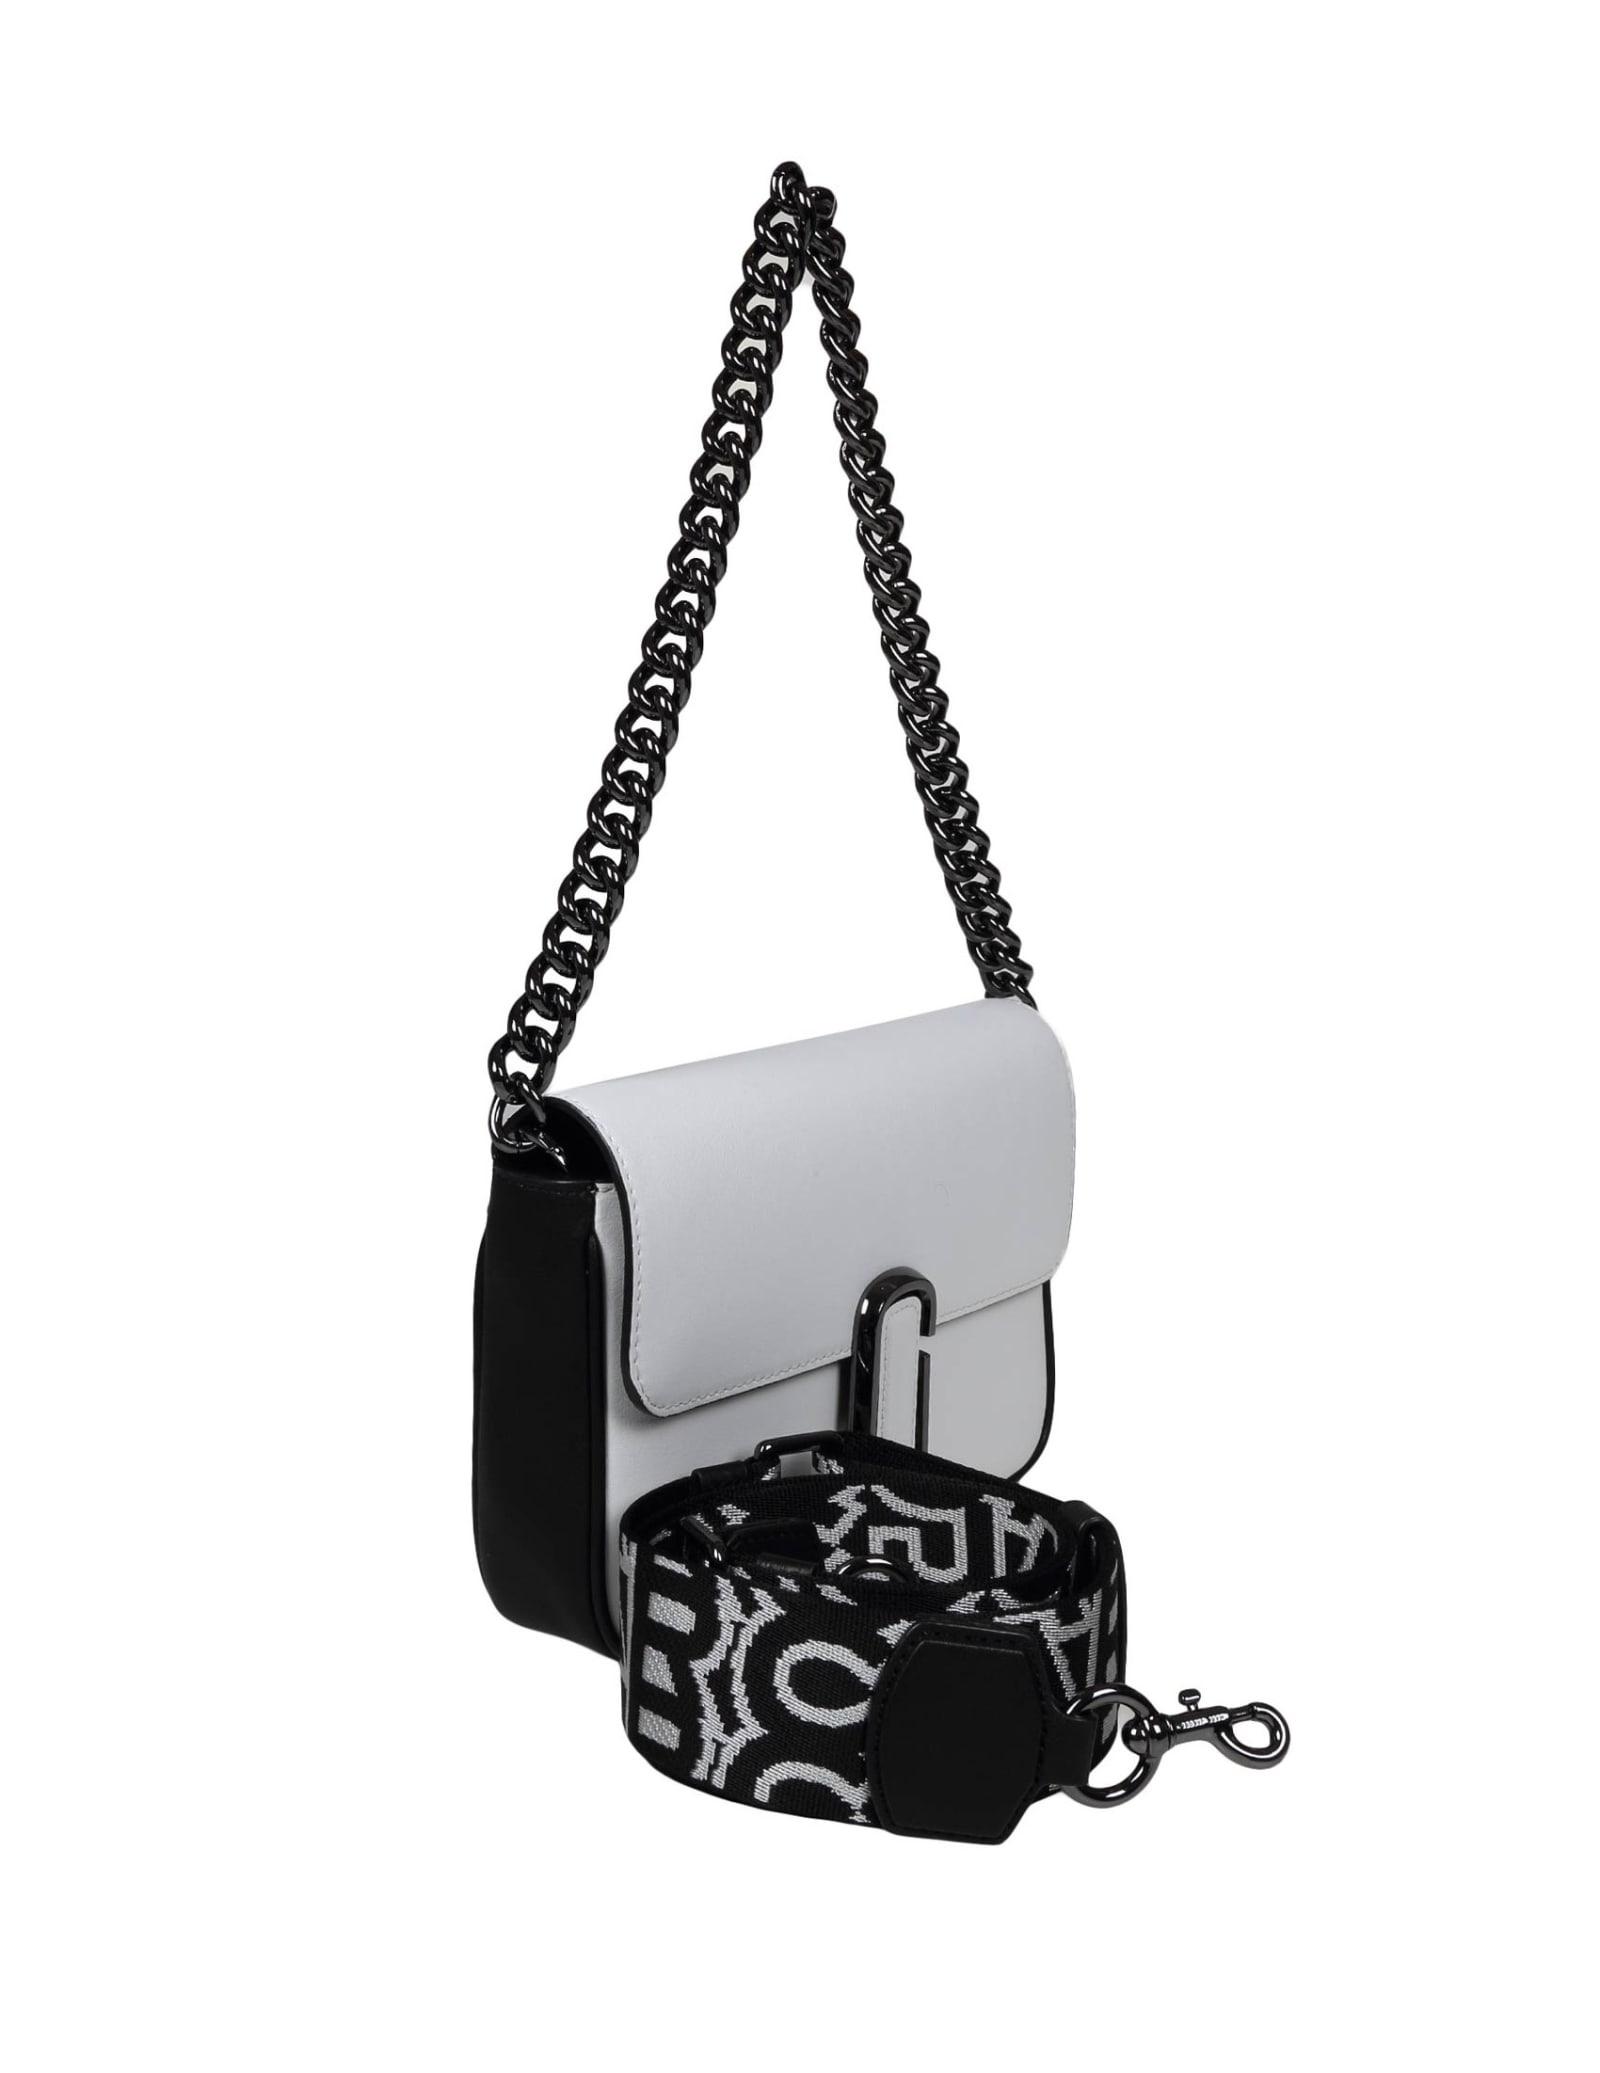 Marc Jacobs Shoulder Bag In Black And White Leather in Metallic